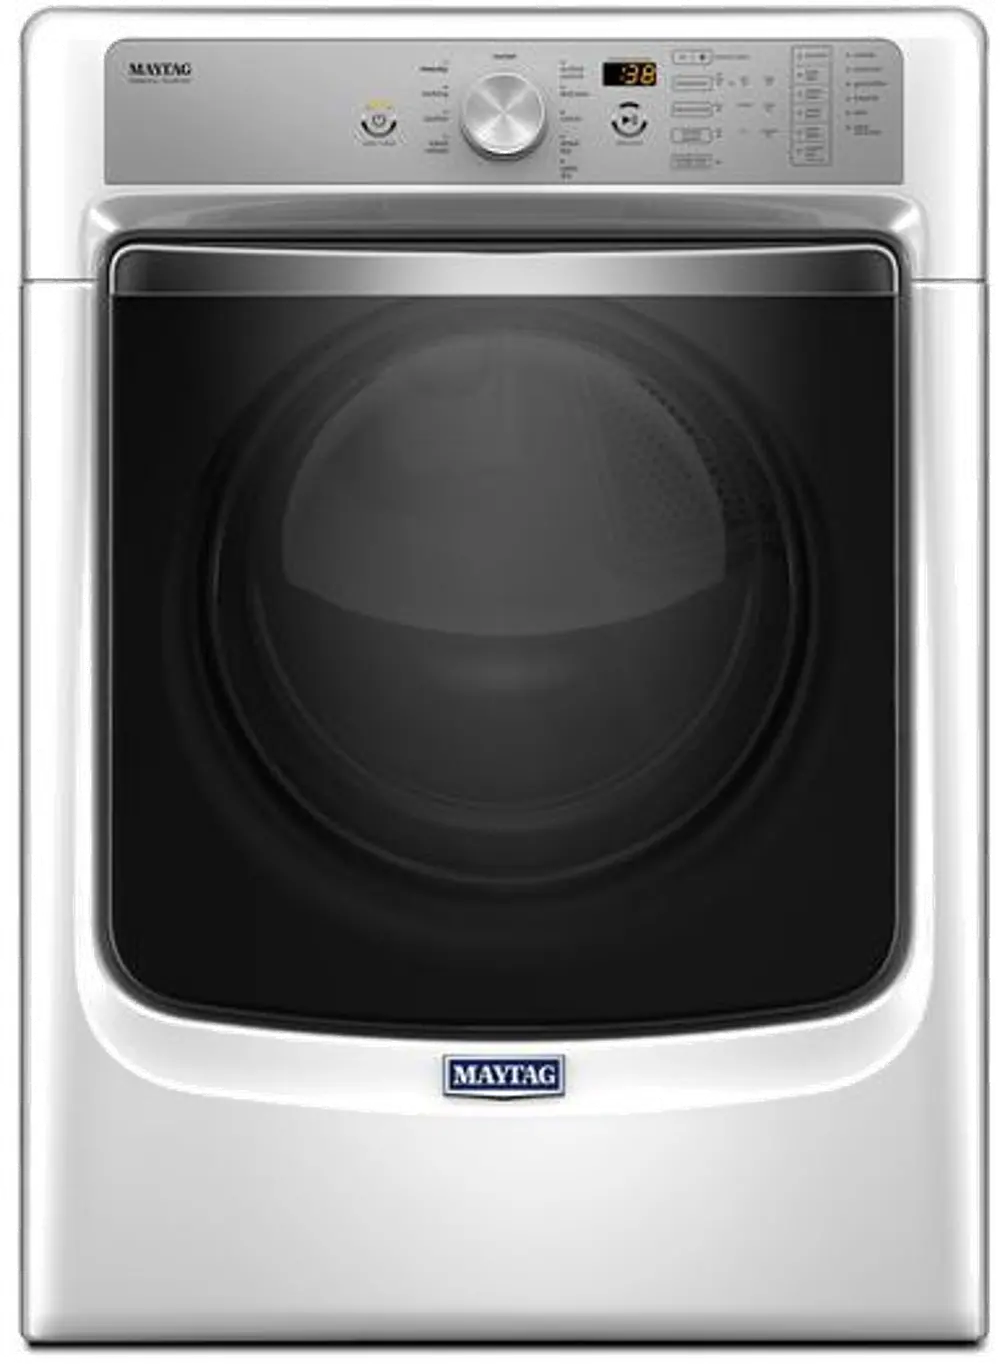 MED8200FW Maytag Electric Dryer with PowerDry - 7.4 cu. ft. White -1